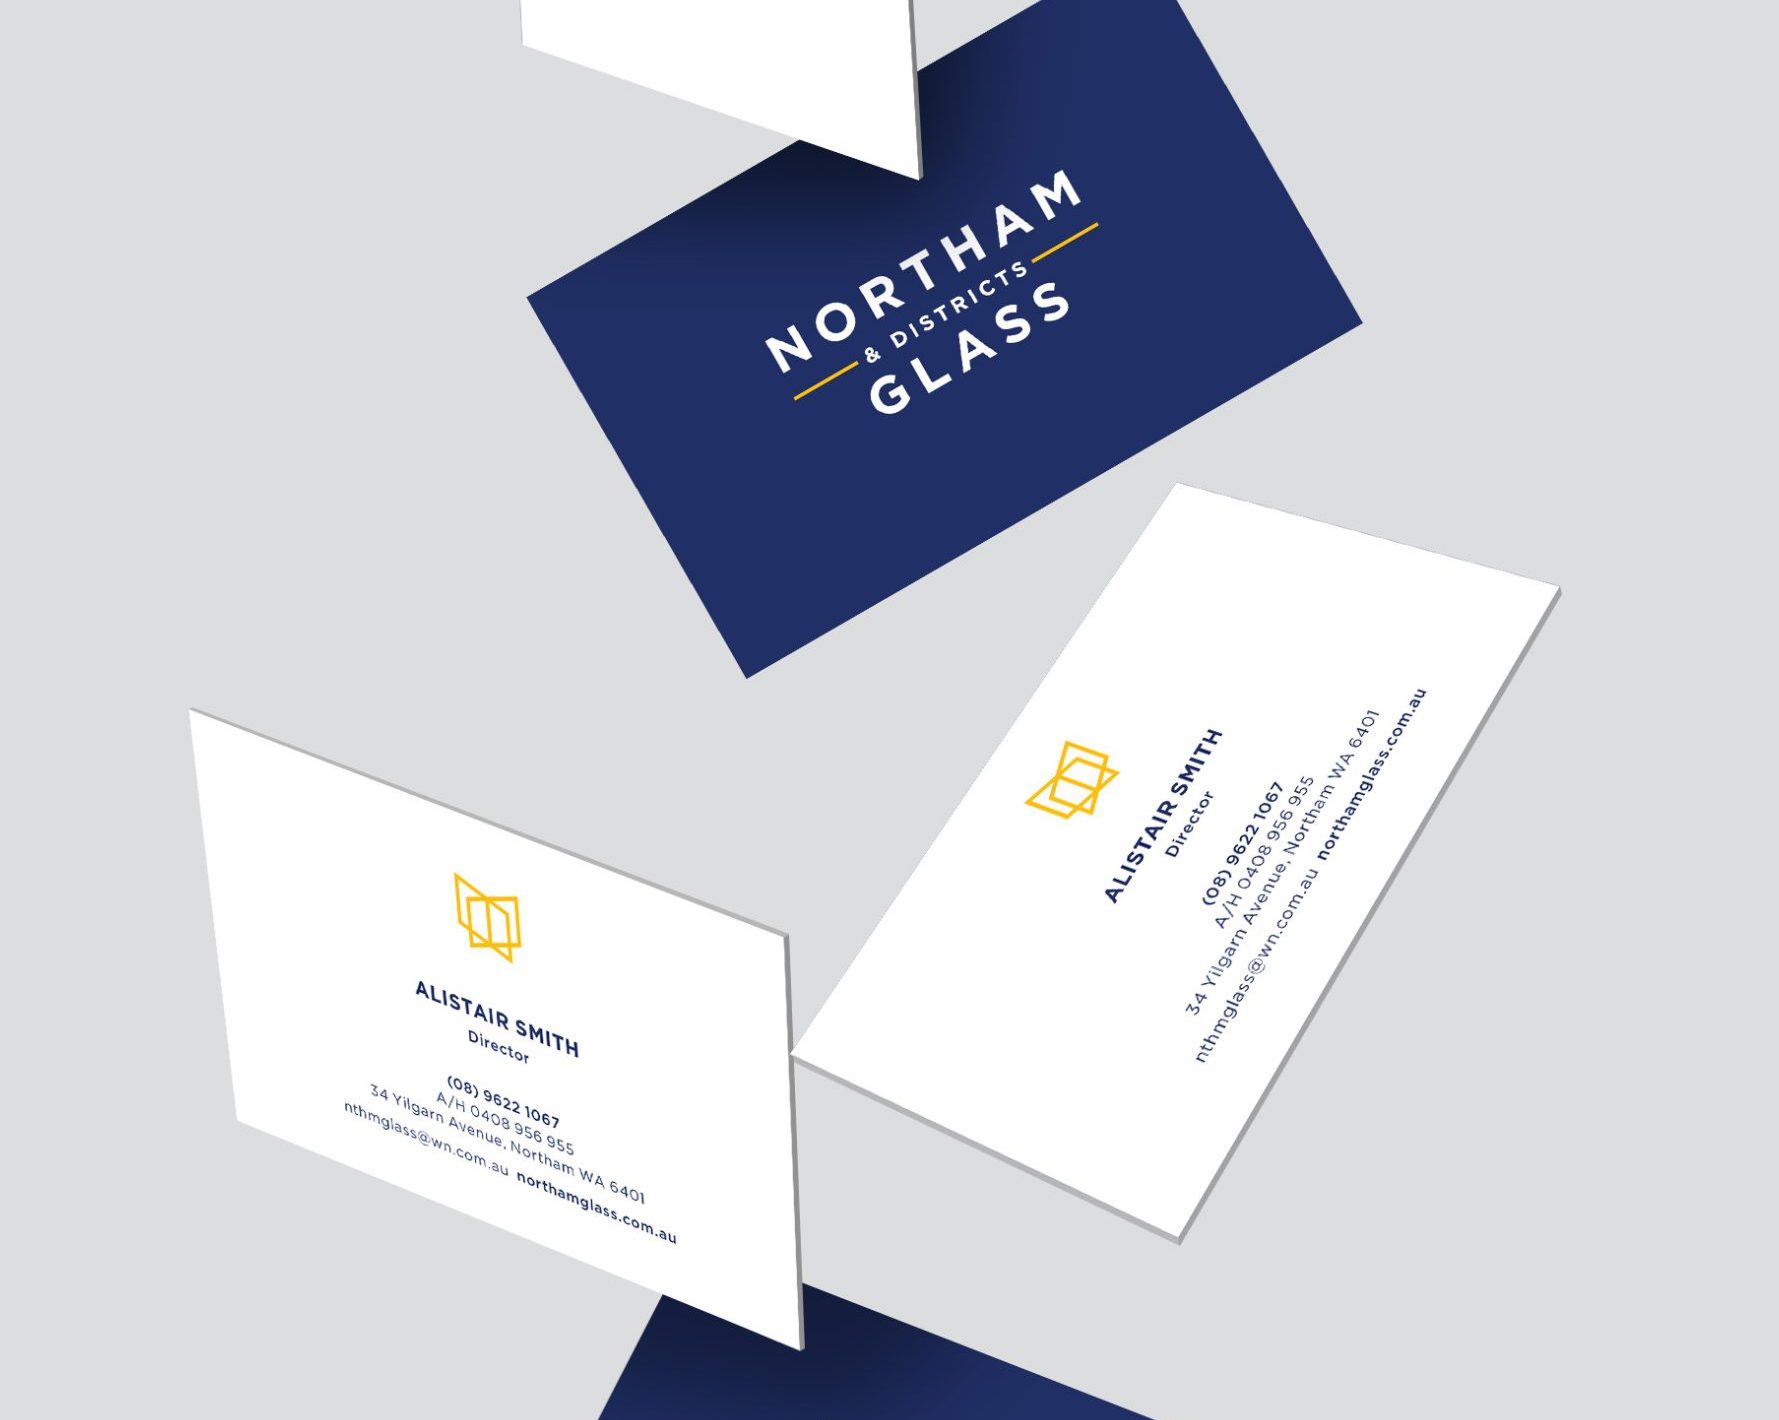 BEVIN CREATIVE – Northern Districts Glass – Cards Mockup